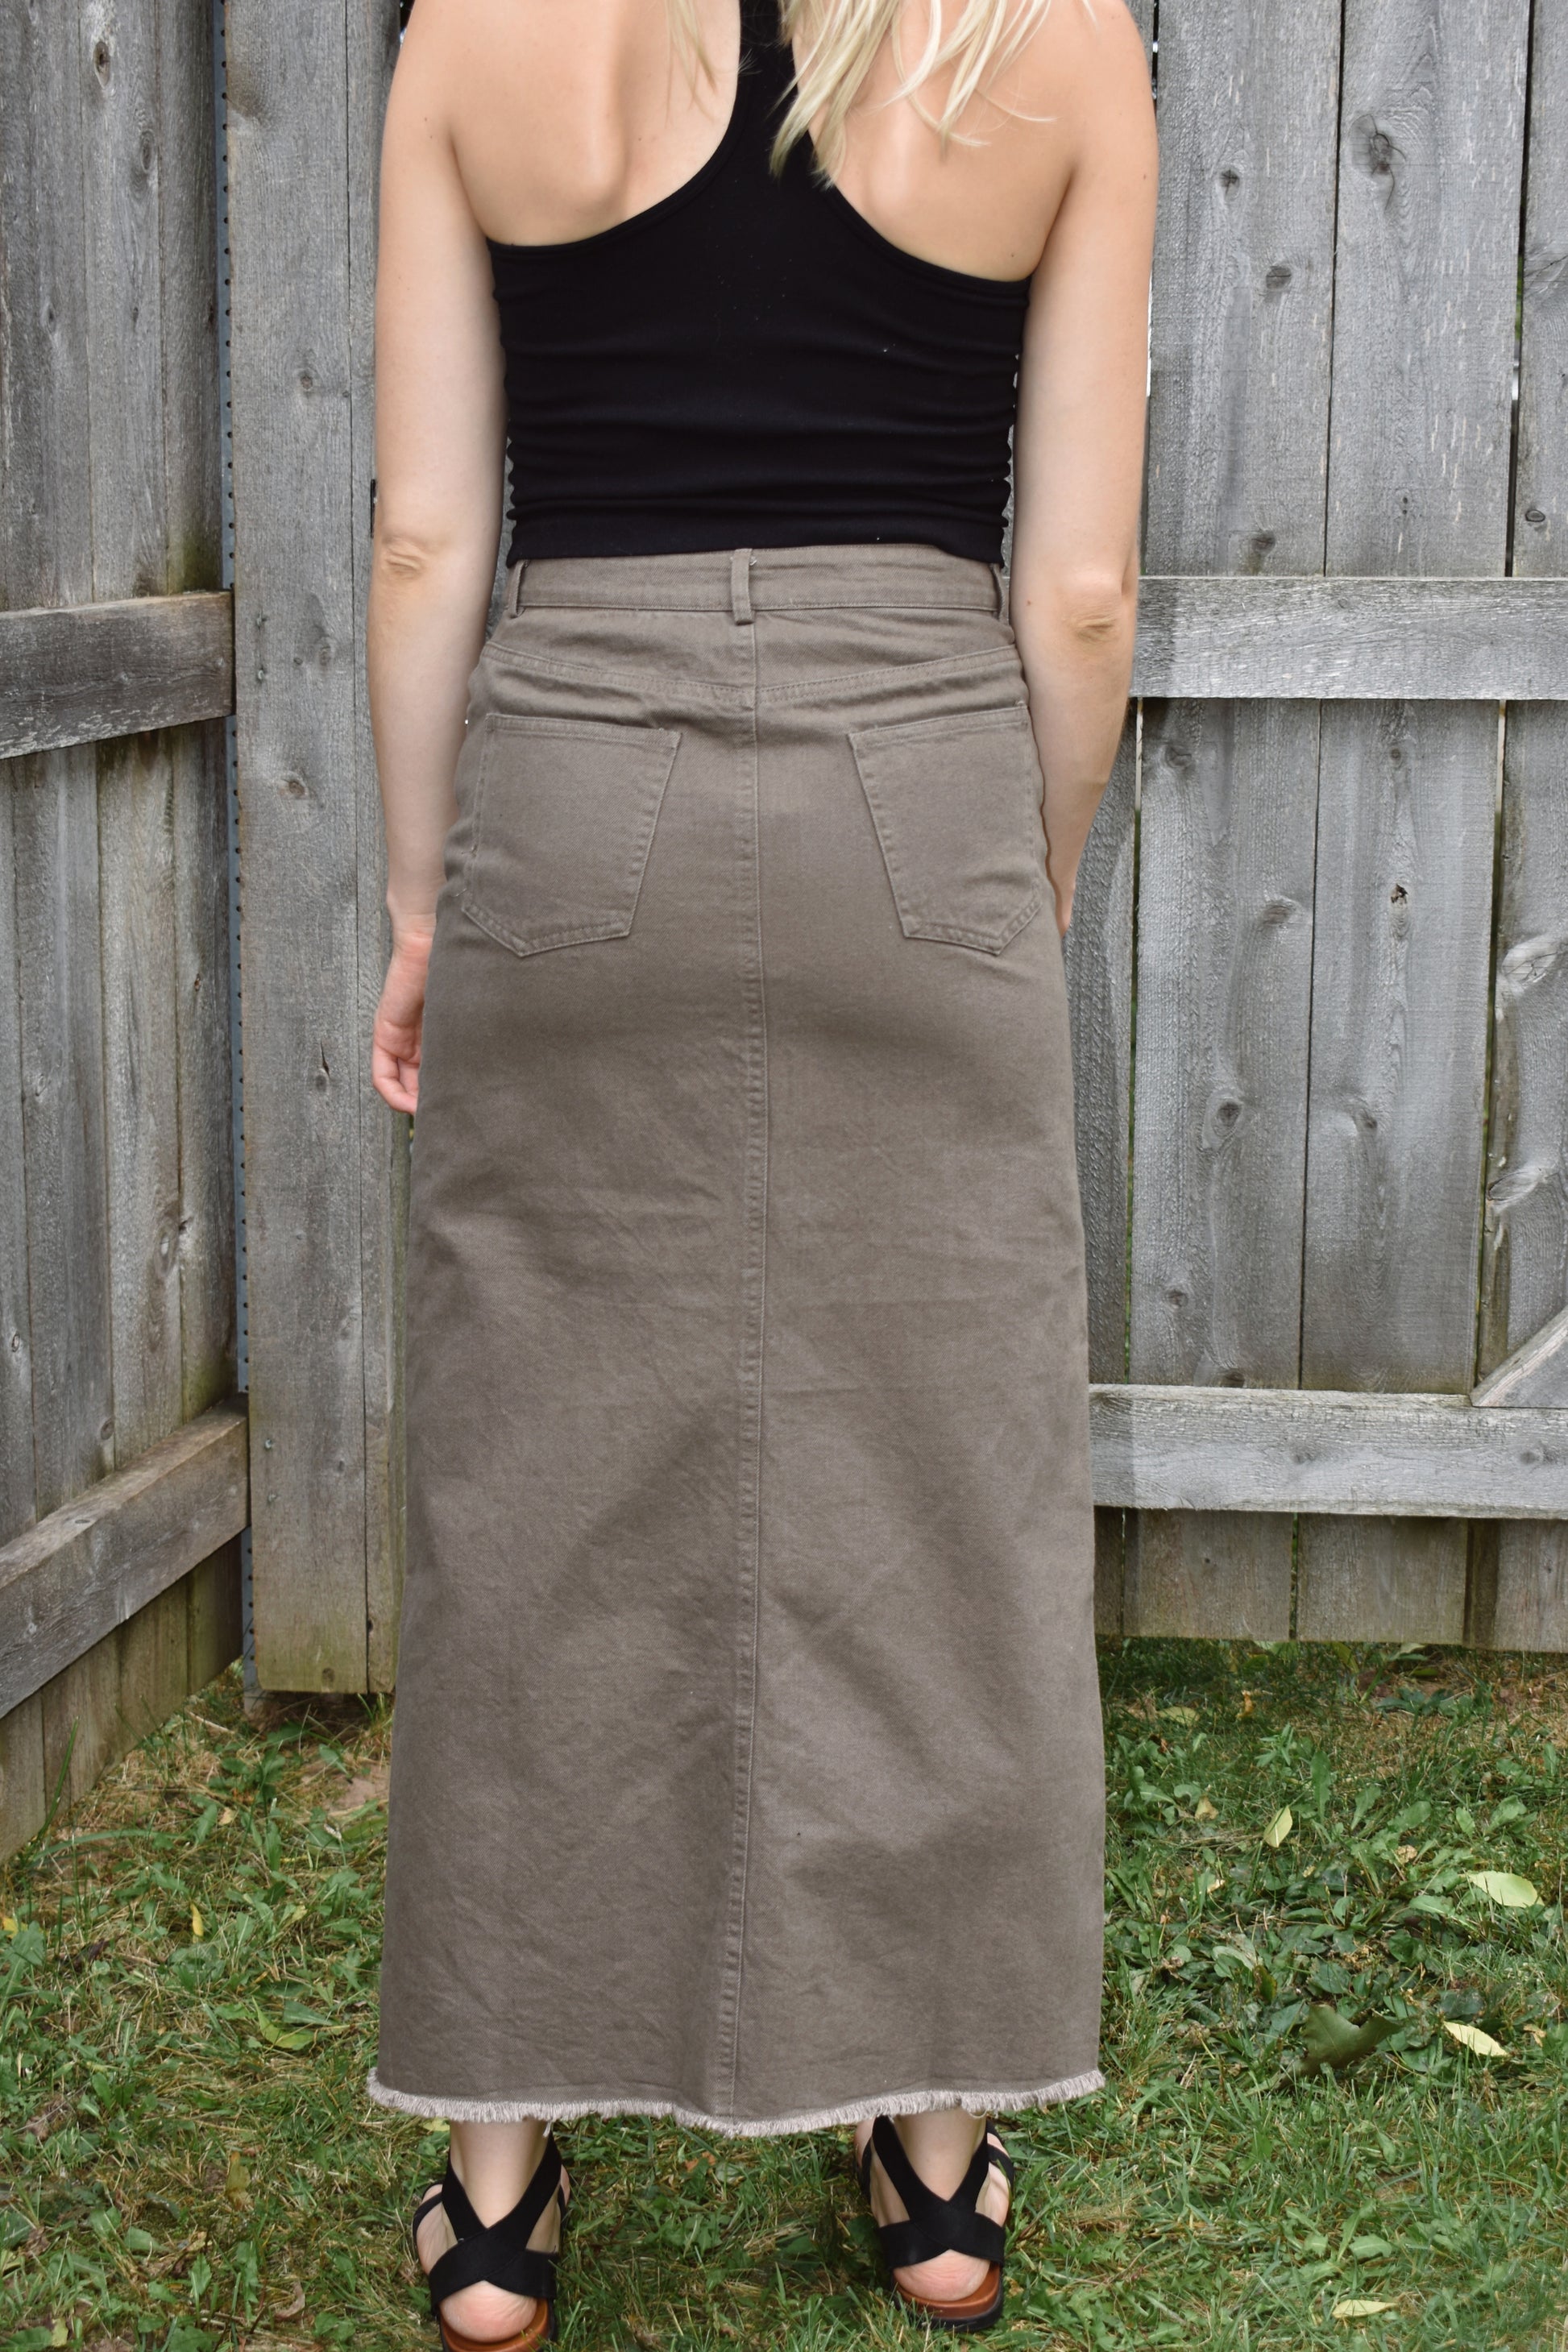 chesnut denim midi skirt with slit up the front in the center, raw hem, front and back pockets, zip and button enclosure